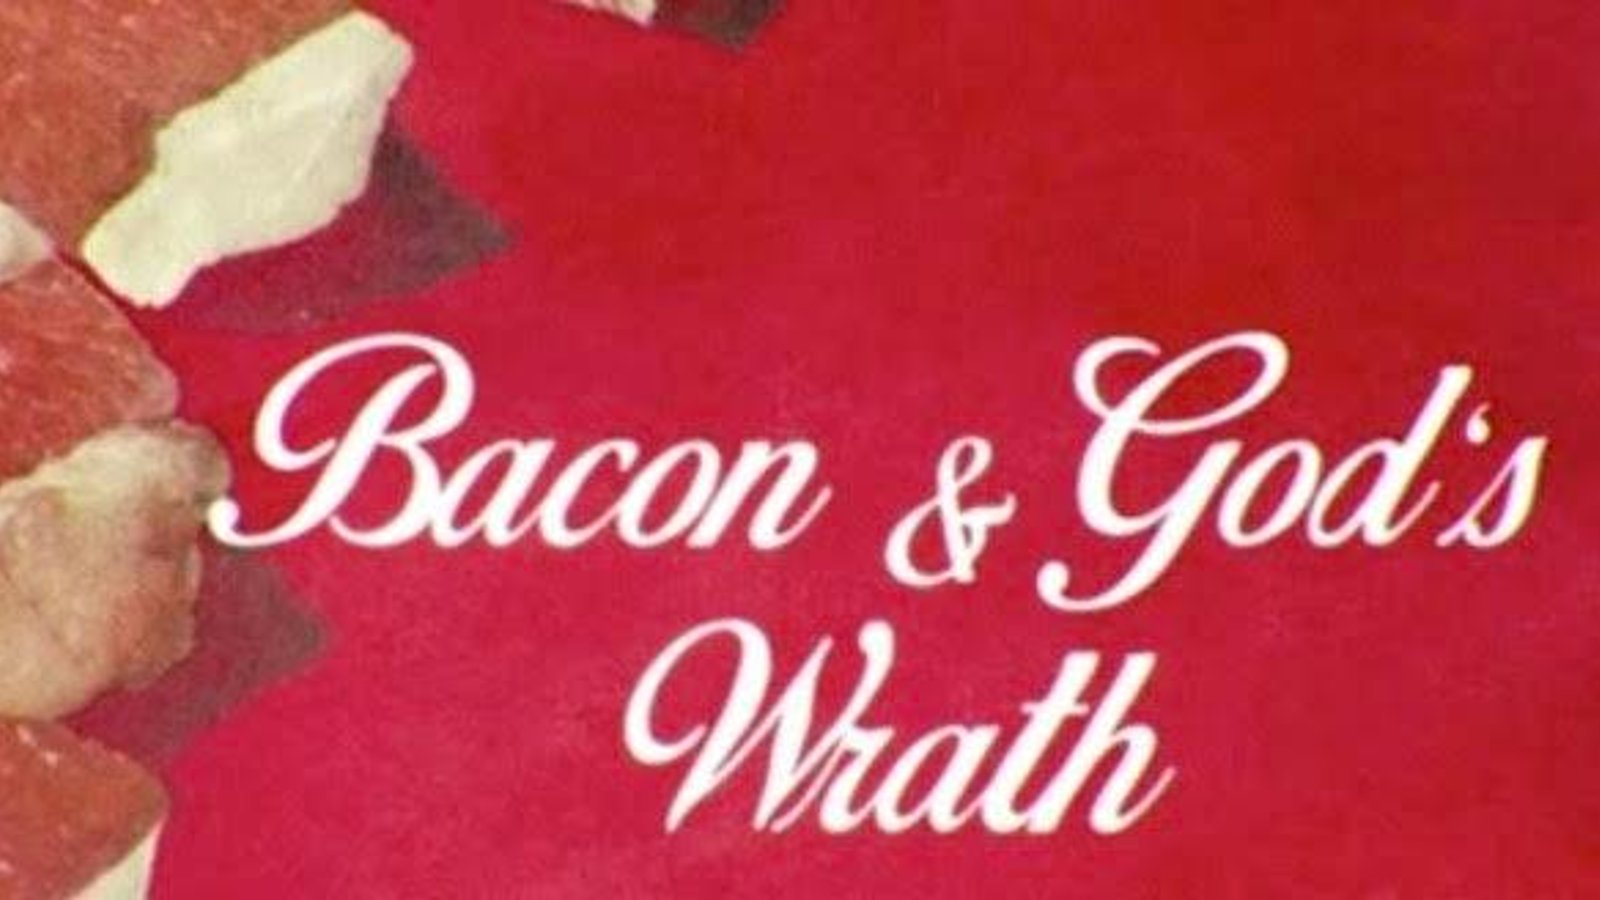 Bacon & God's Wrath - A Jewish Woman Tastes Bacon for the First Time